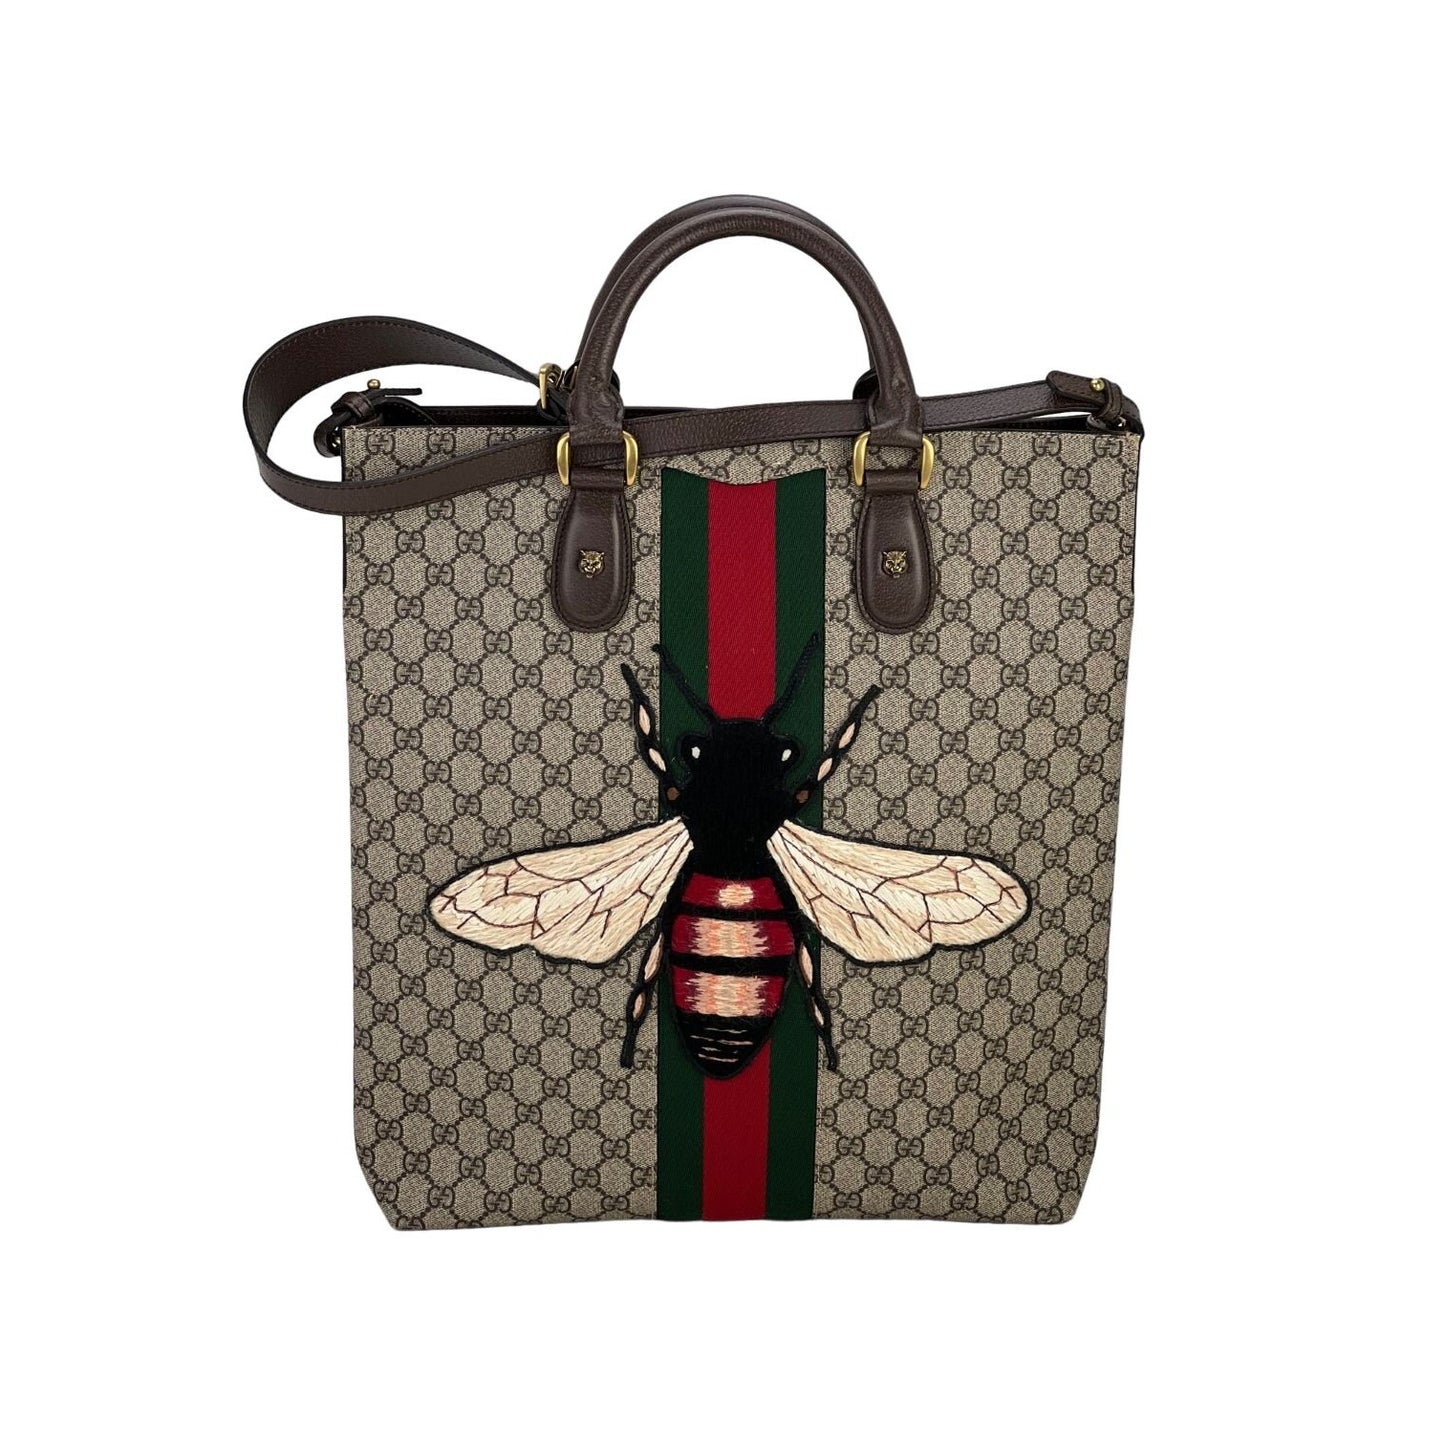 Gucci Accessory Collection Vertical Shopper Tote in GG Canvas with